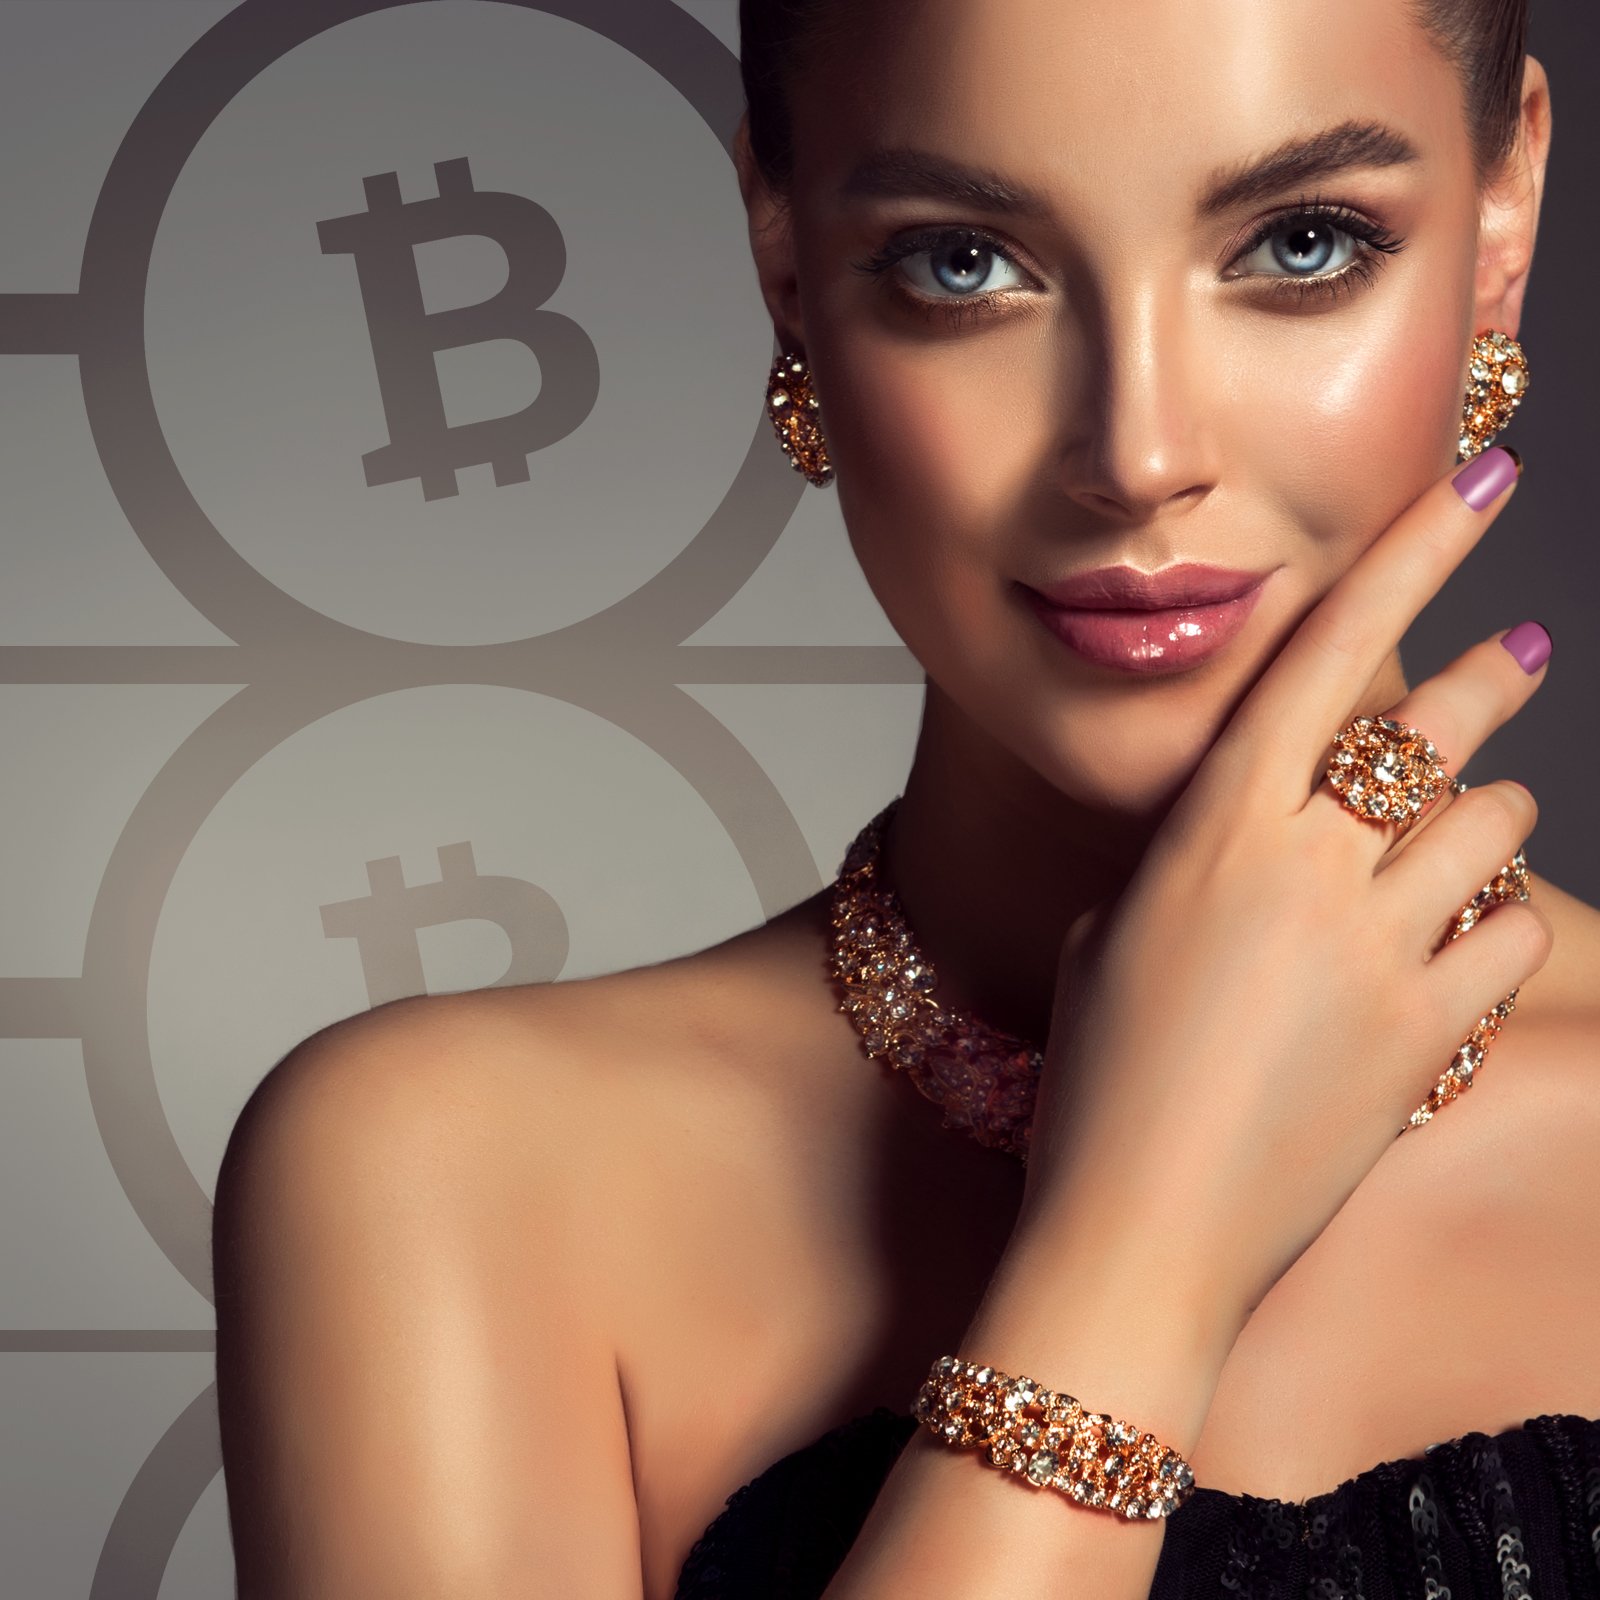 Fine Jewelry Dealer Birks Group Now Accepts Bitcoin